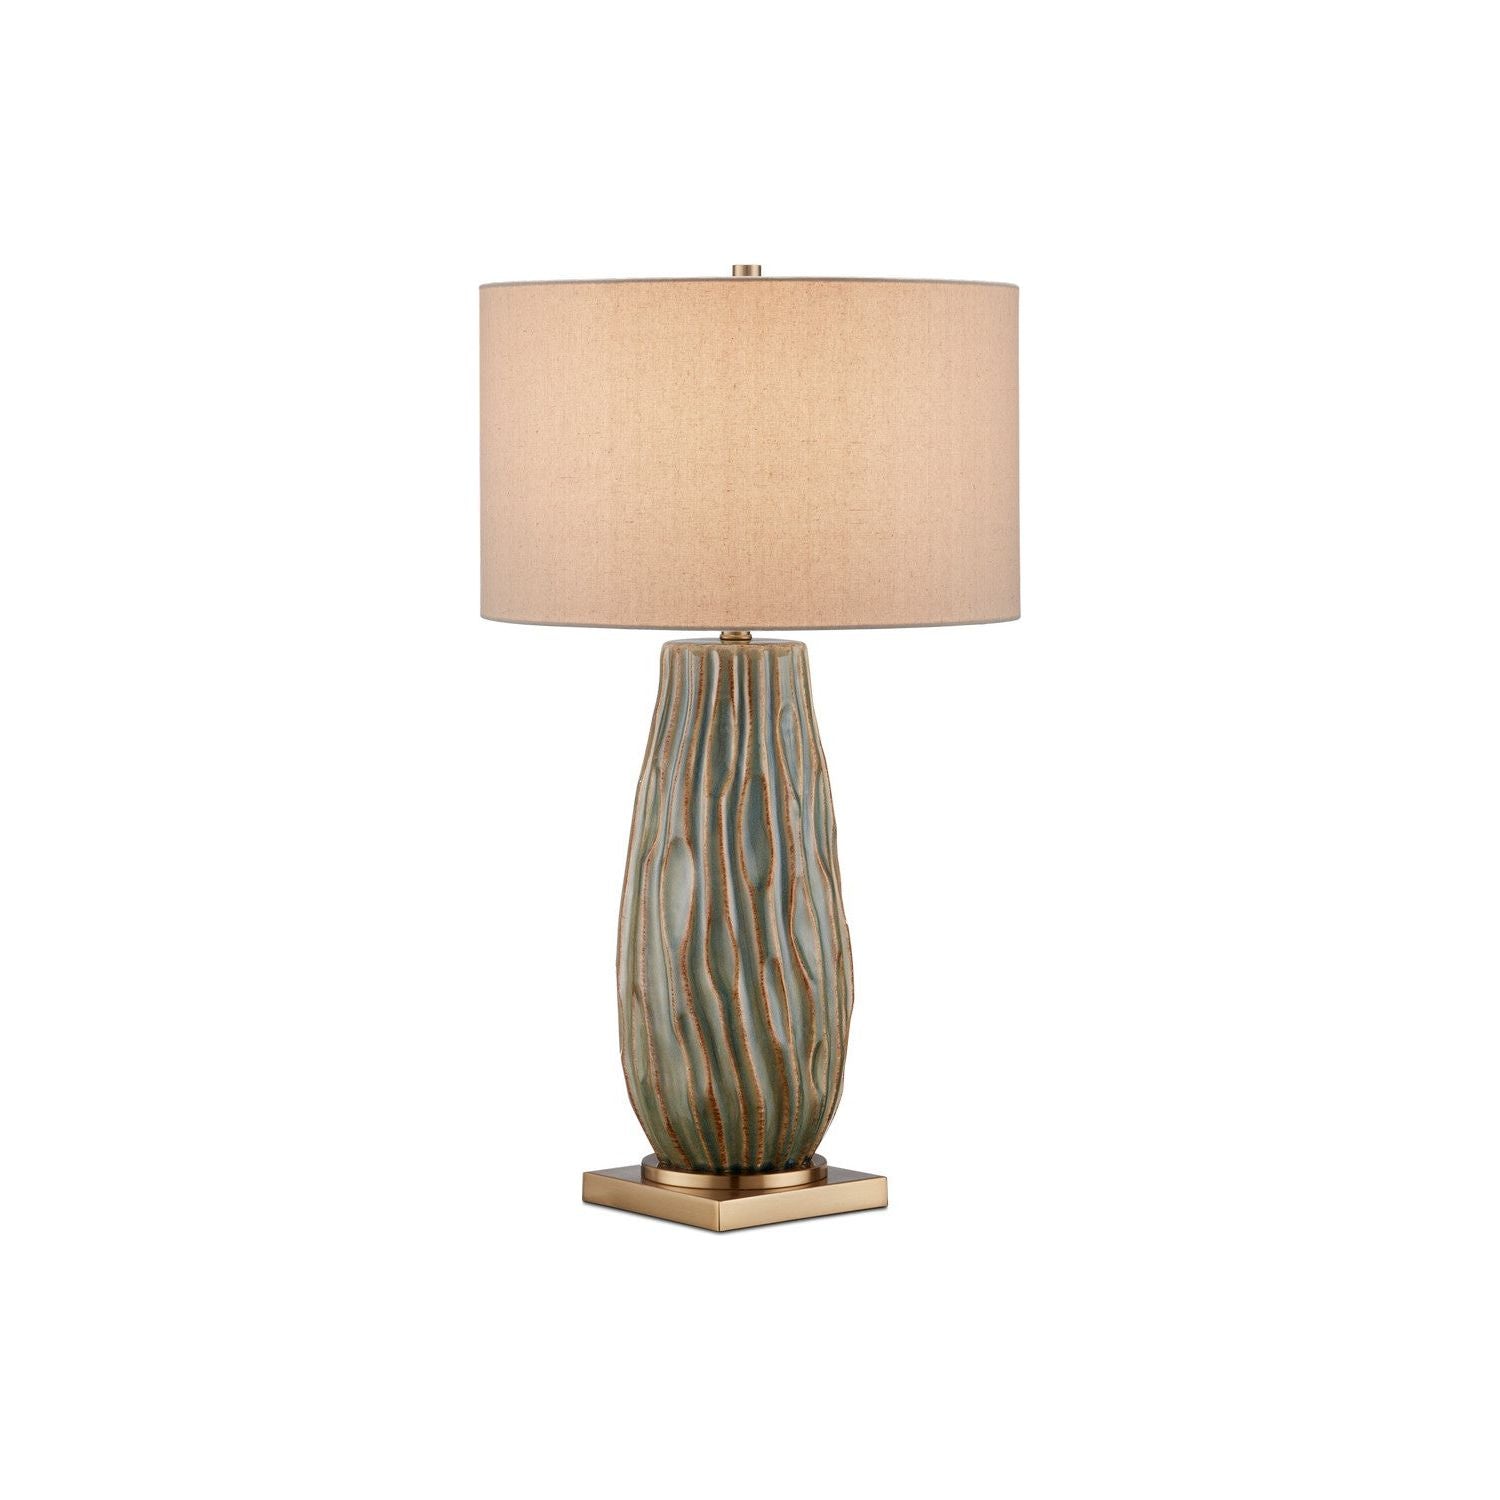 Currey and Company - 6000-0963 - One Light Table Lamp - Forest Reactive/Antique Brass